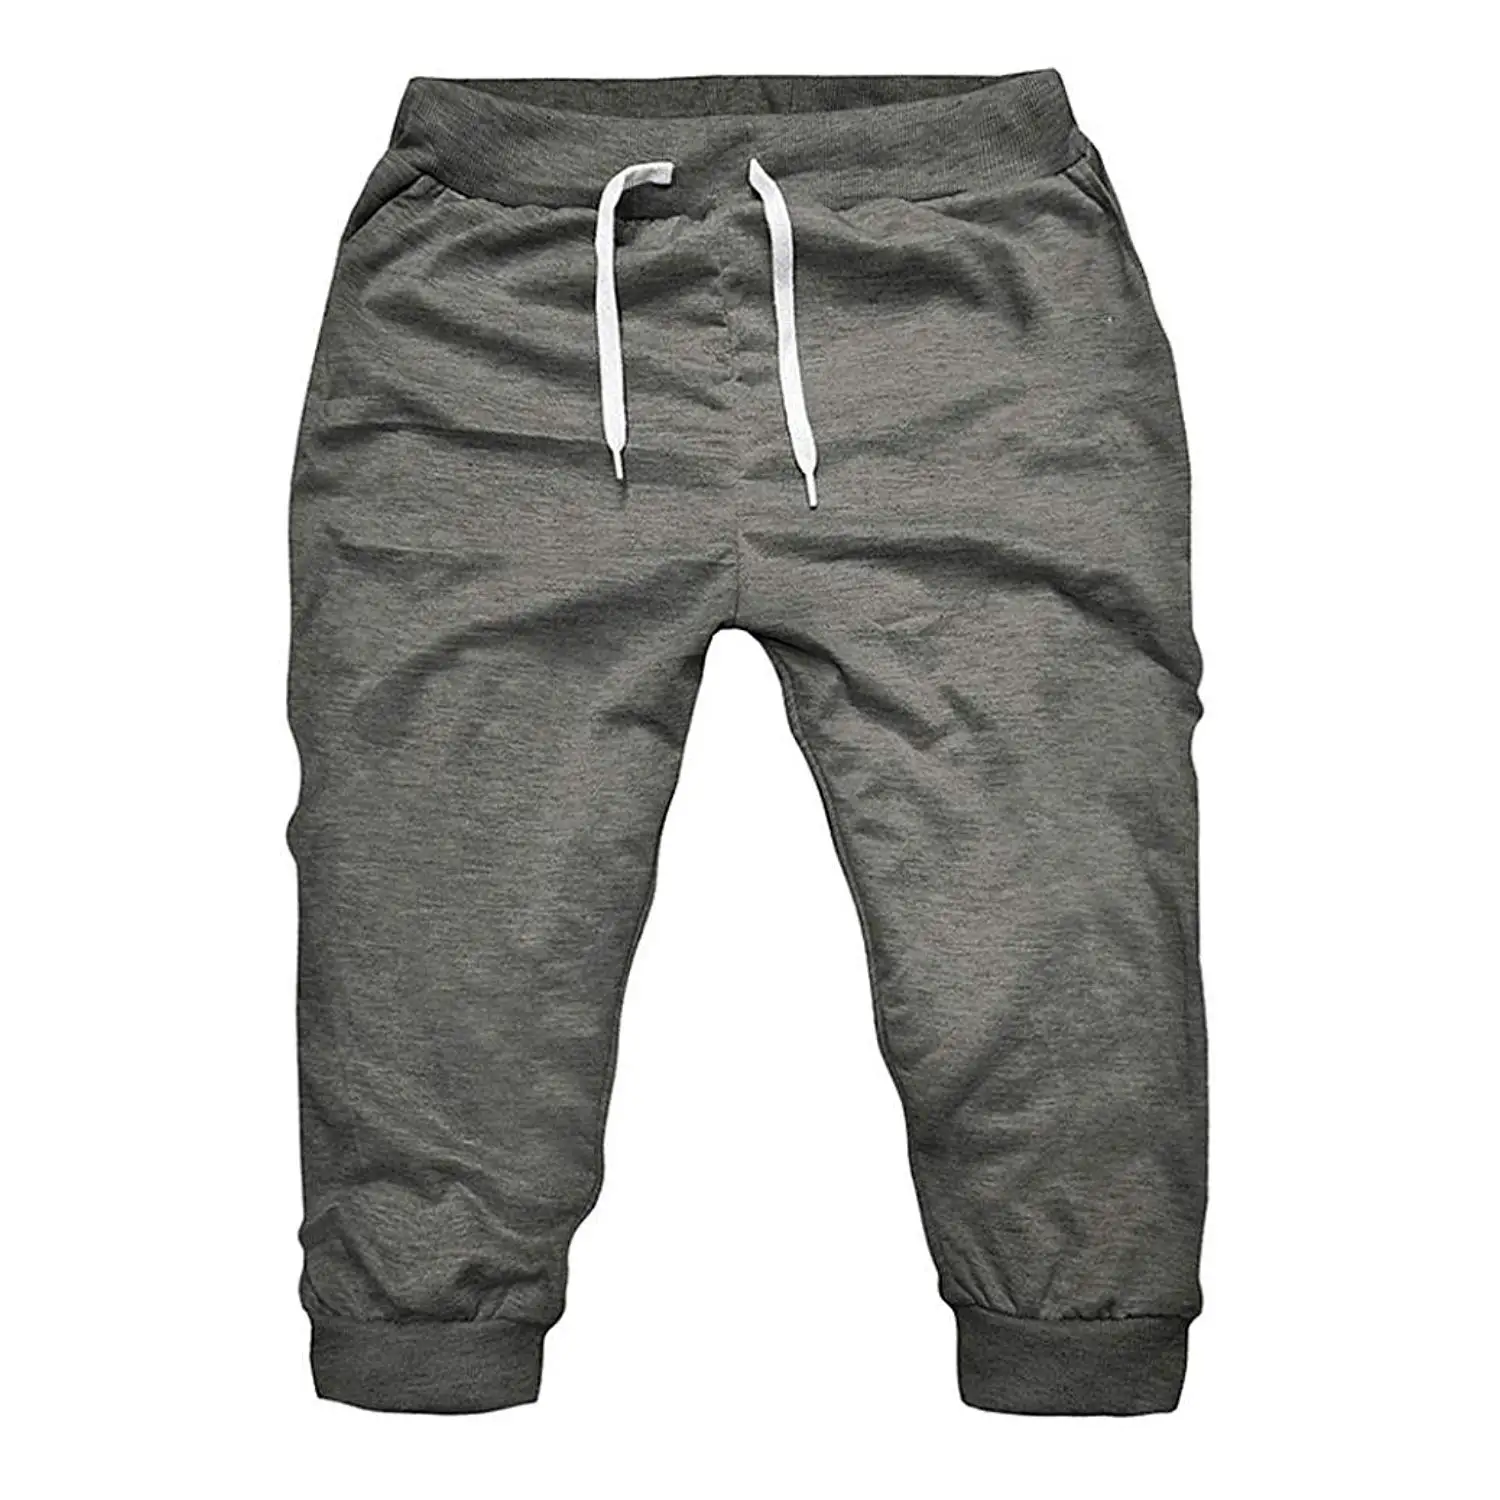 Cheap Mens Gym Joggers, find Mens Gym Joggers deals on line at Alibaba.com